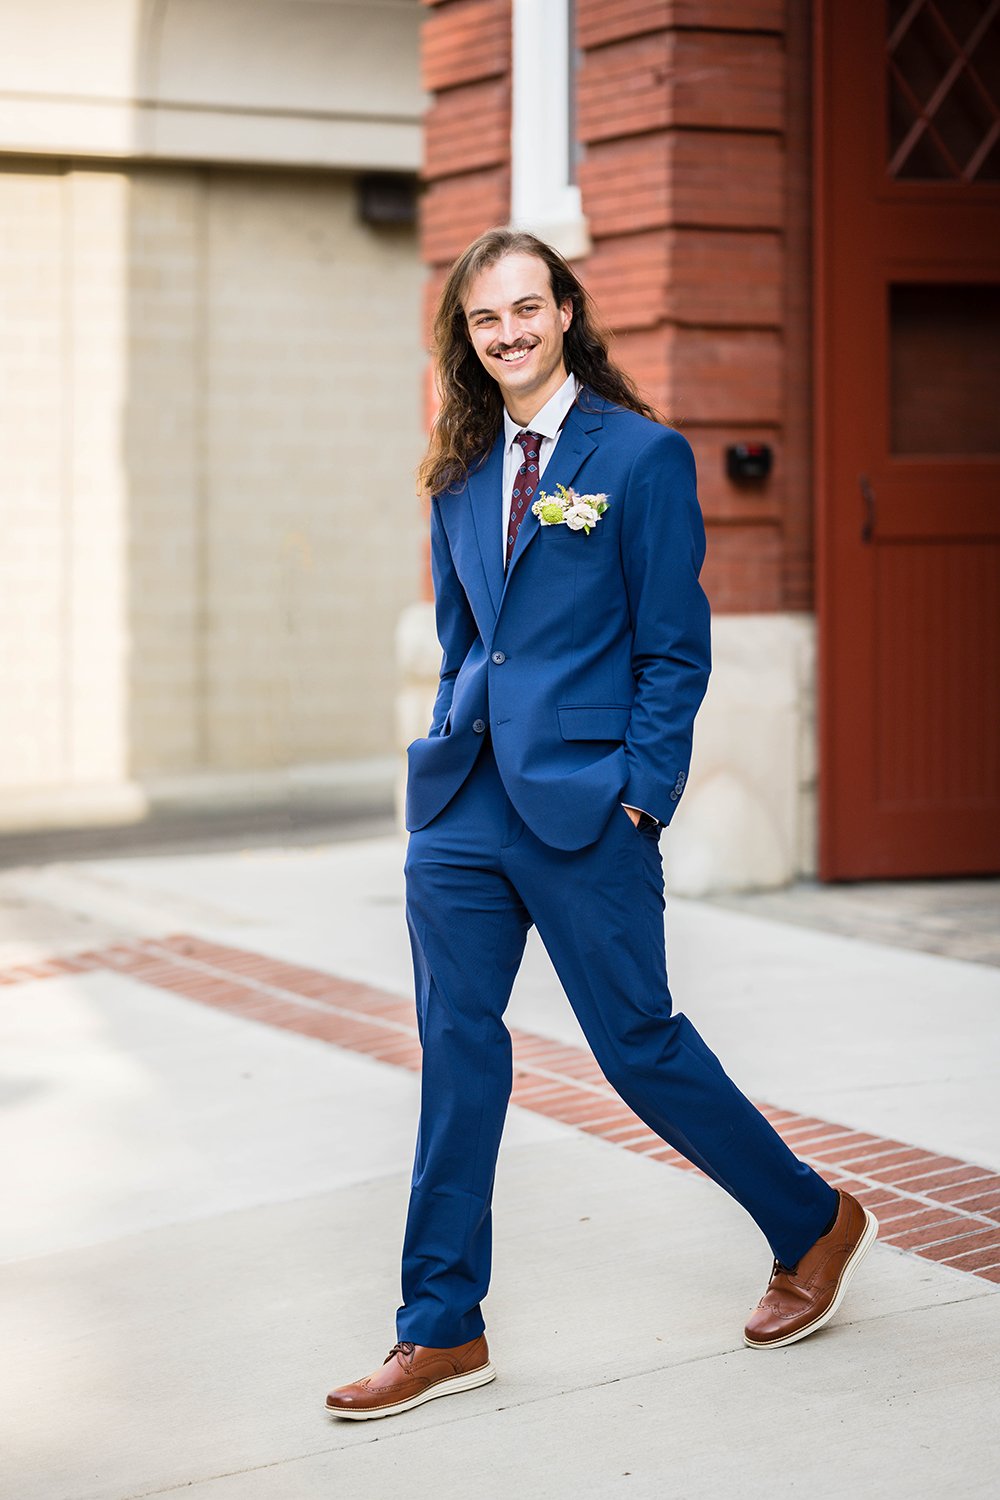 A groom walks with his hands in his pockets in front of the Fire Station One Hotel and smiles away from the camera.